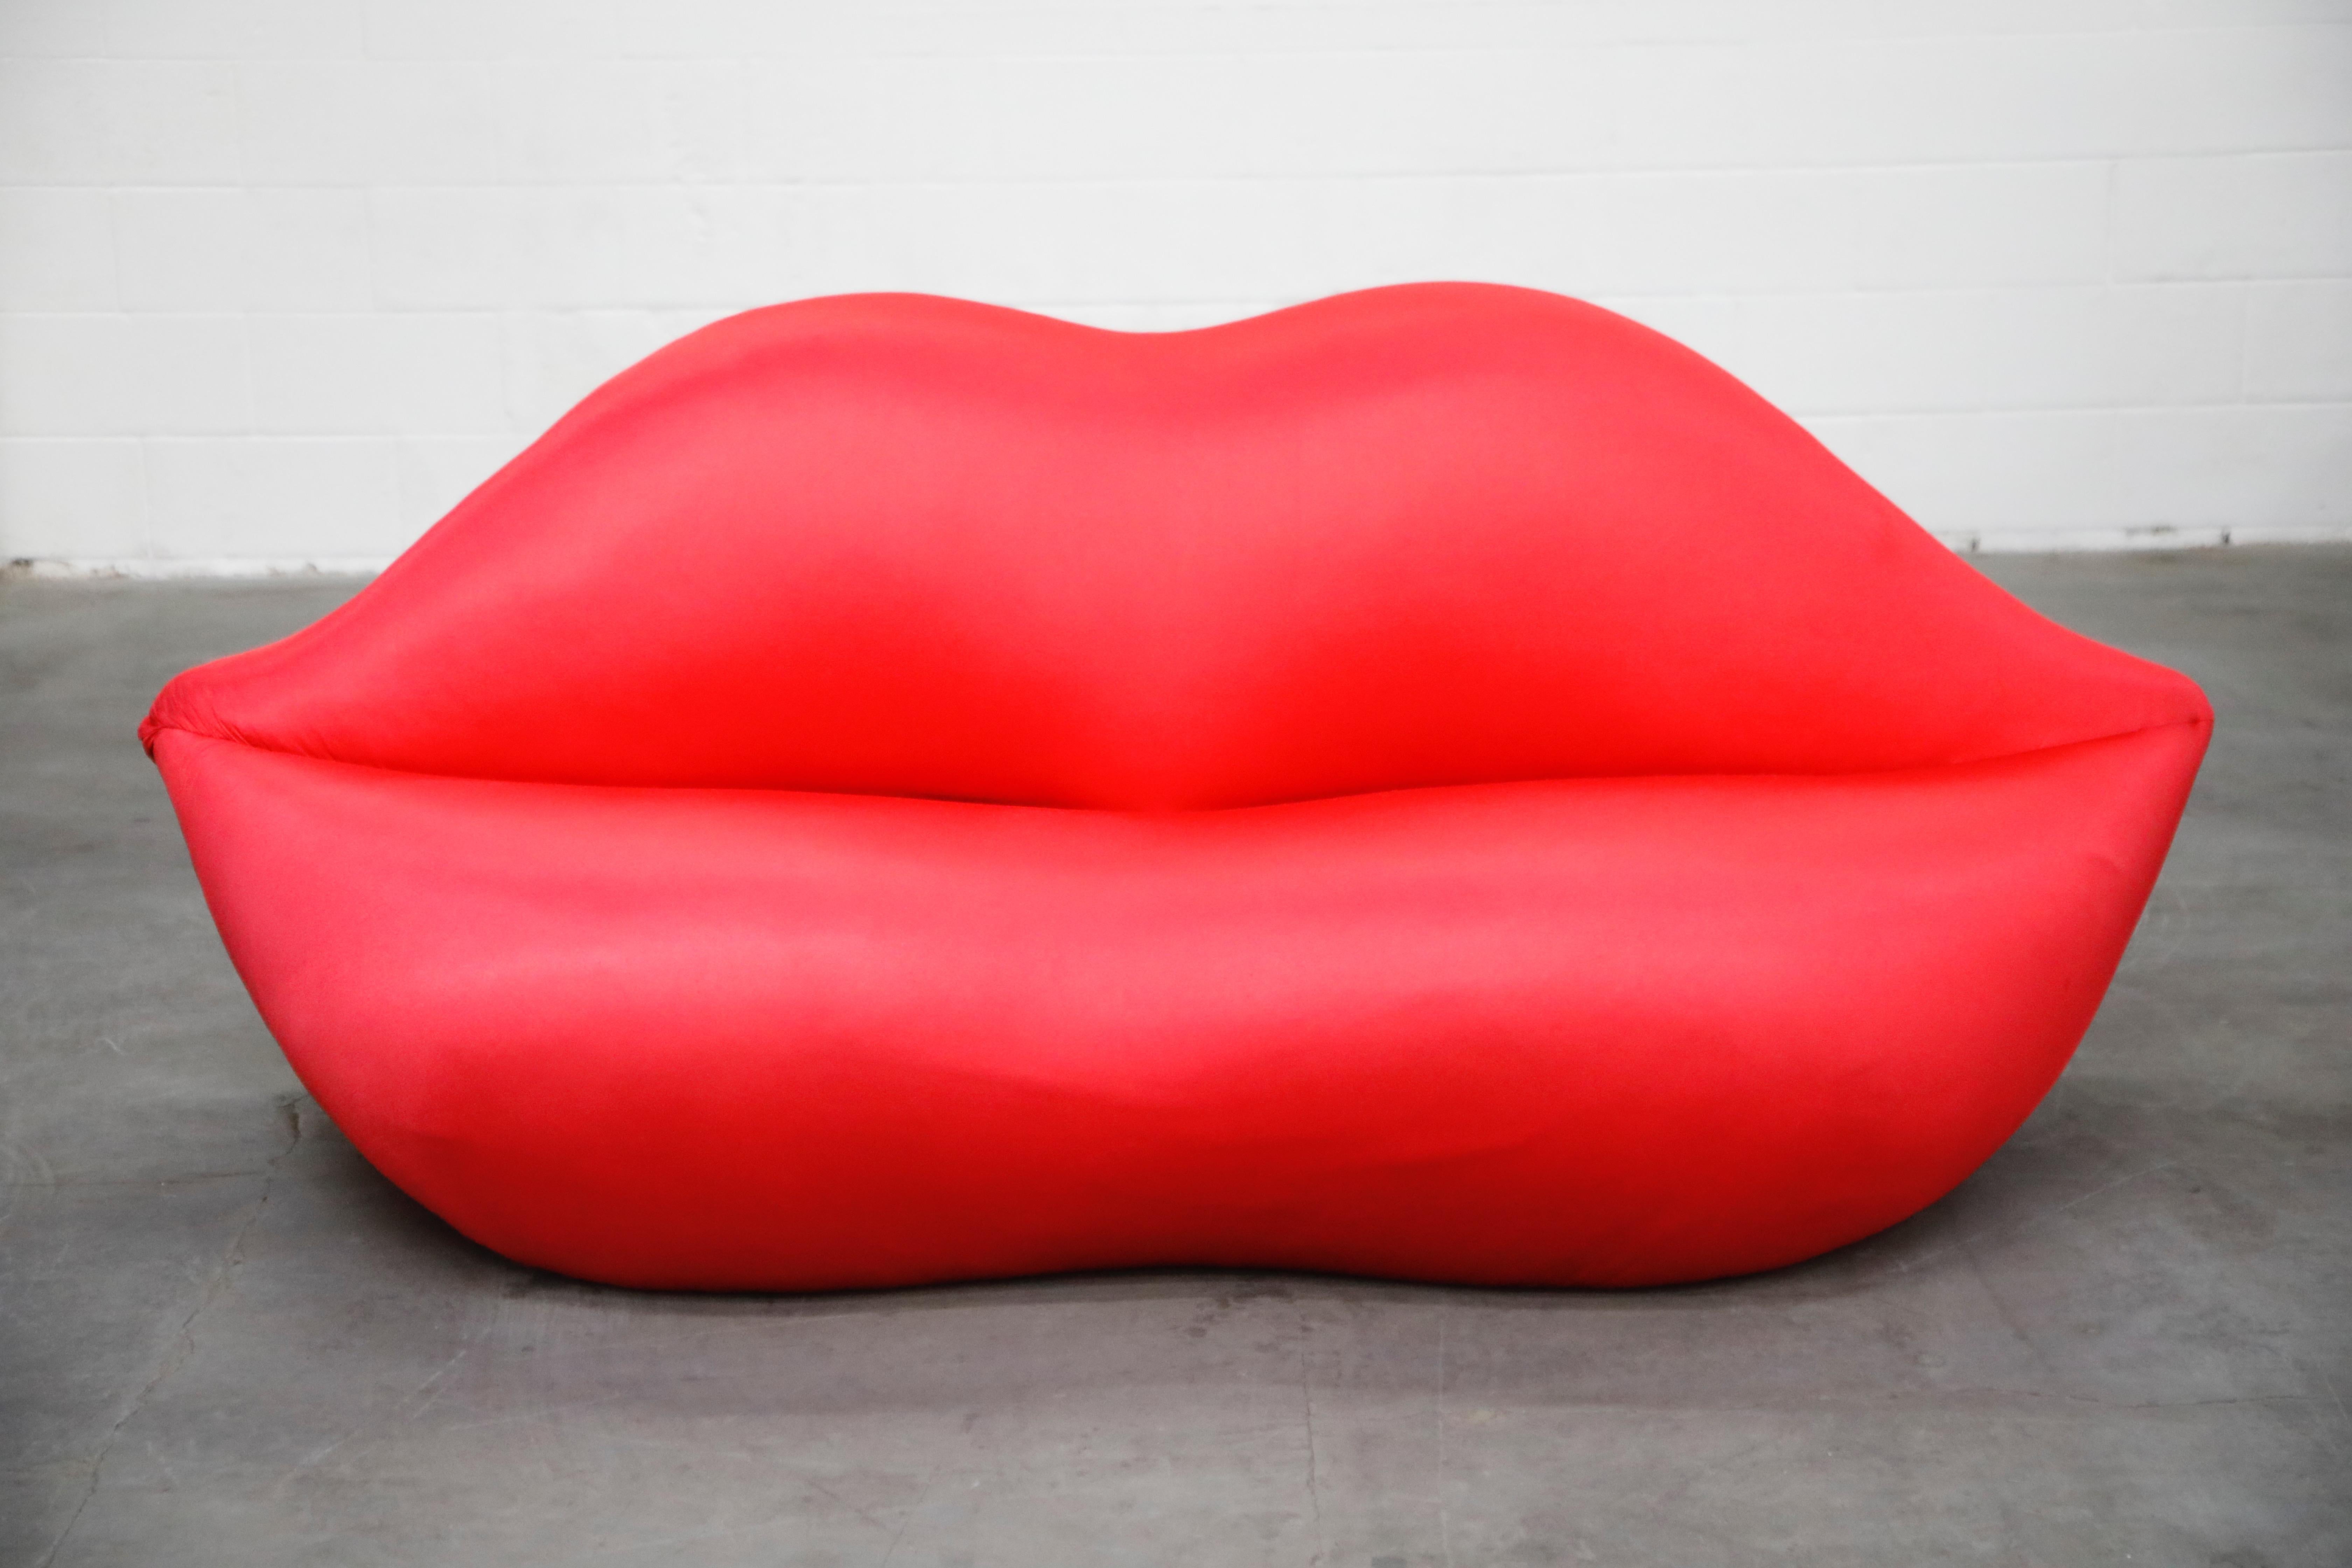 This incredible lips sofa is by Studio 65 for Gufram, part of their 'Multipli' limited edition collections, the Bocca (Lips) sofa was a run of 1,000 units - and this particular example is signed: Gufram Multipli, Dated: 1986 and numbered: 103 /